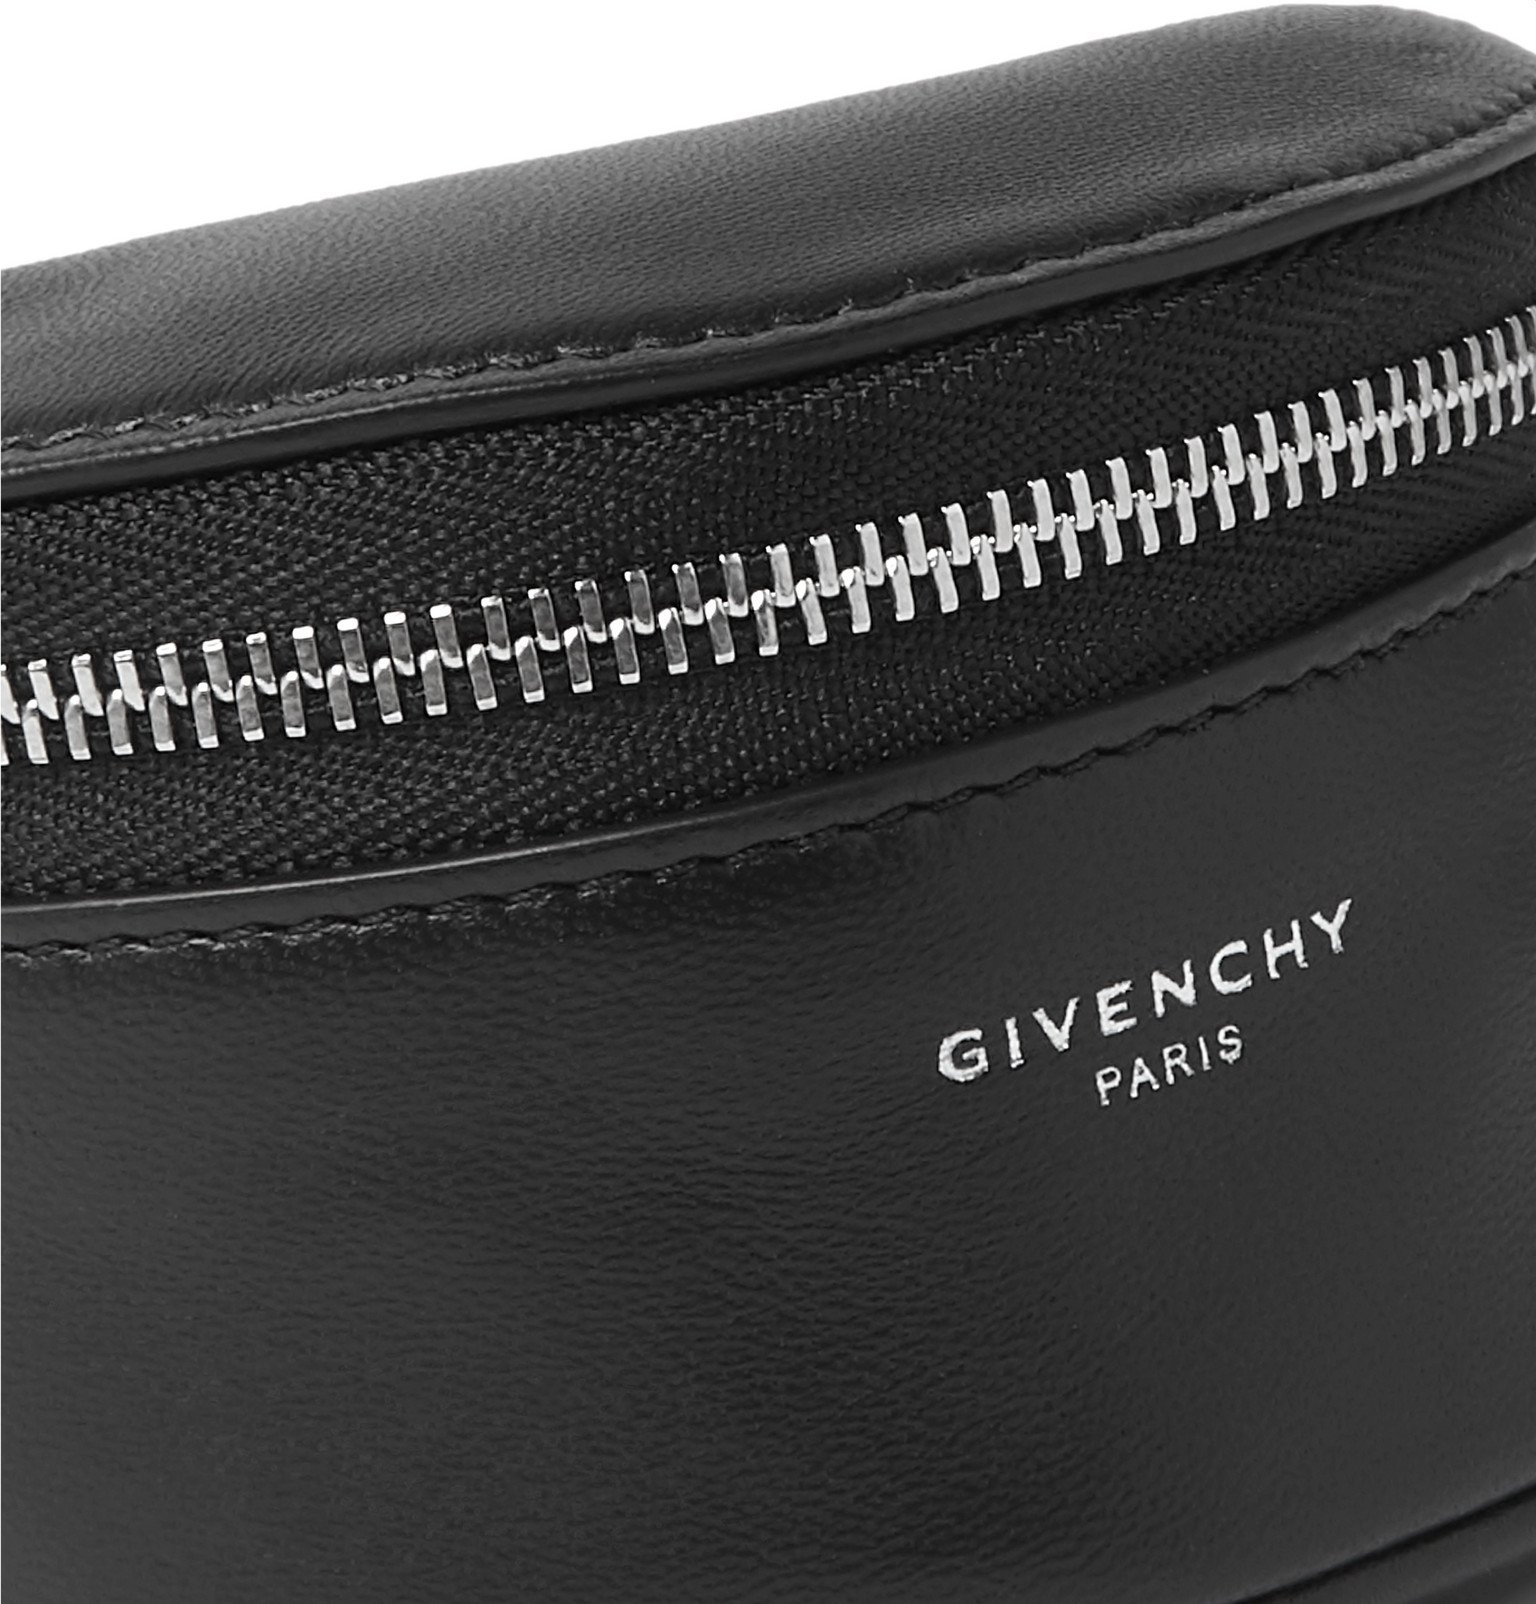 Givenchy - Leather Wrist Pouch - Black Givenchy